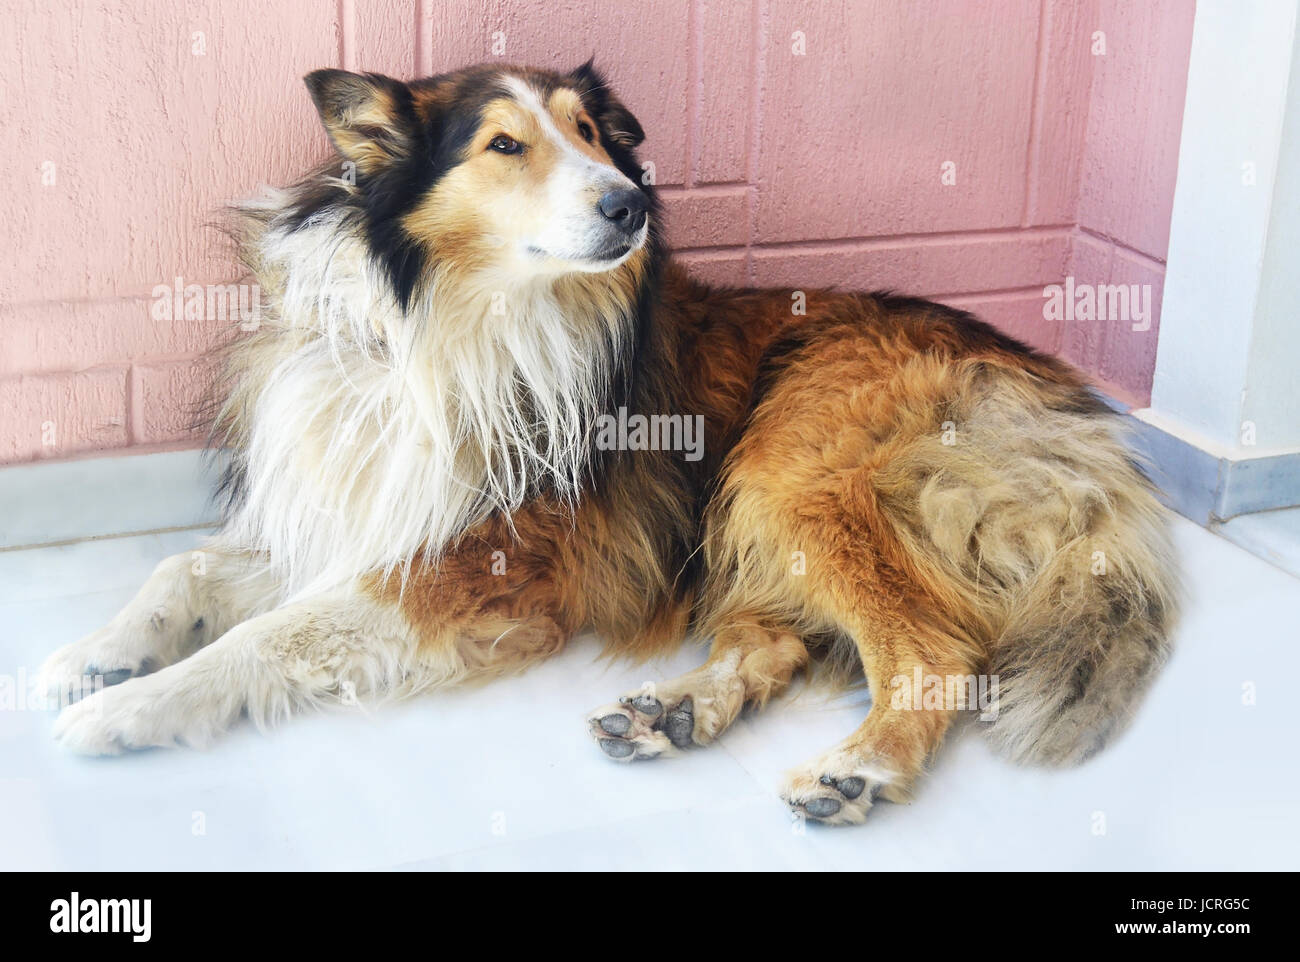 Usa Lassie Postage Stamp Stock Photo - Download Image Now - Lassie -  Fictional Dog, Television Show, Dog - iStock